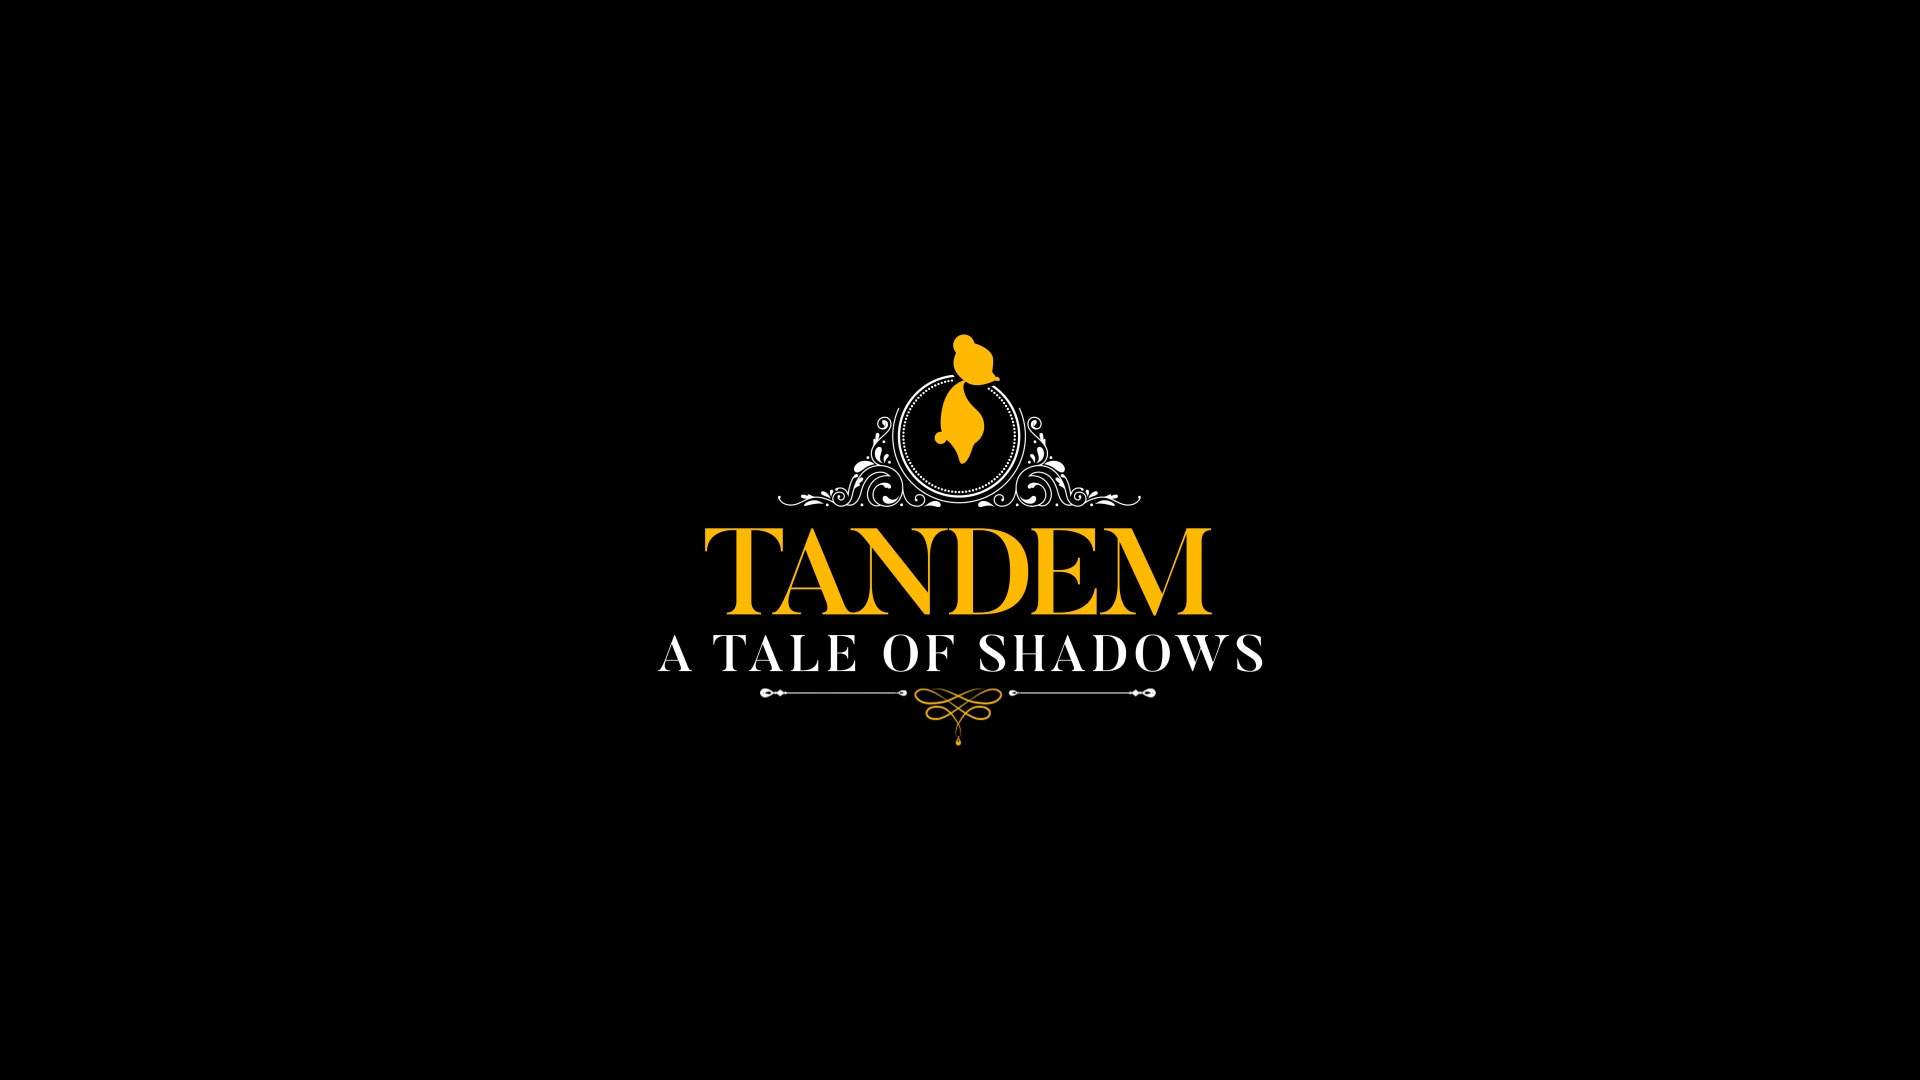 Video For Introducing Tandem: A Tale of Shadows, Out Now on Xbox One